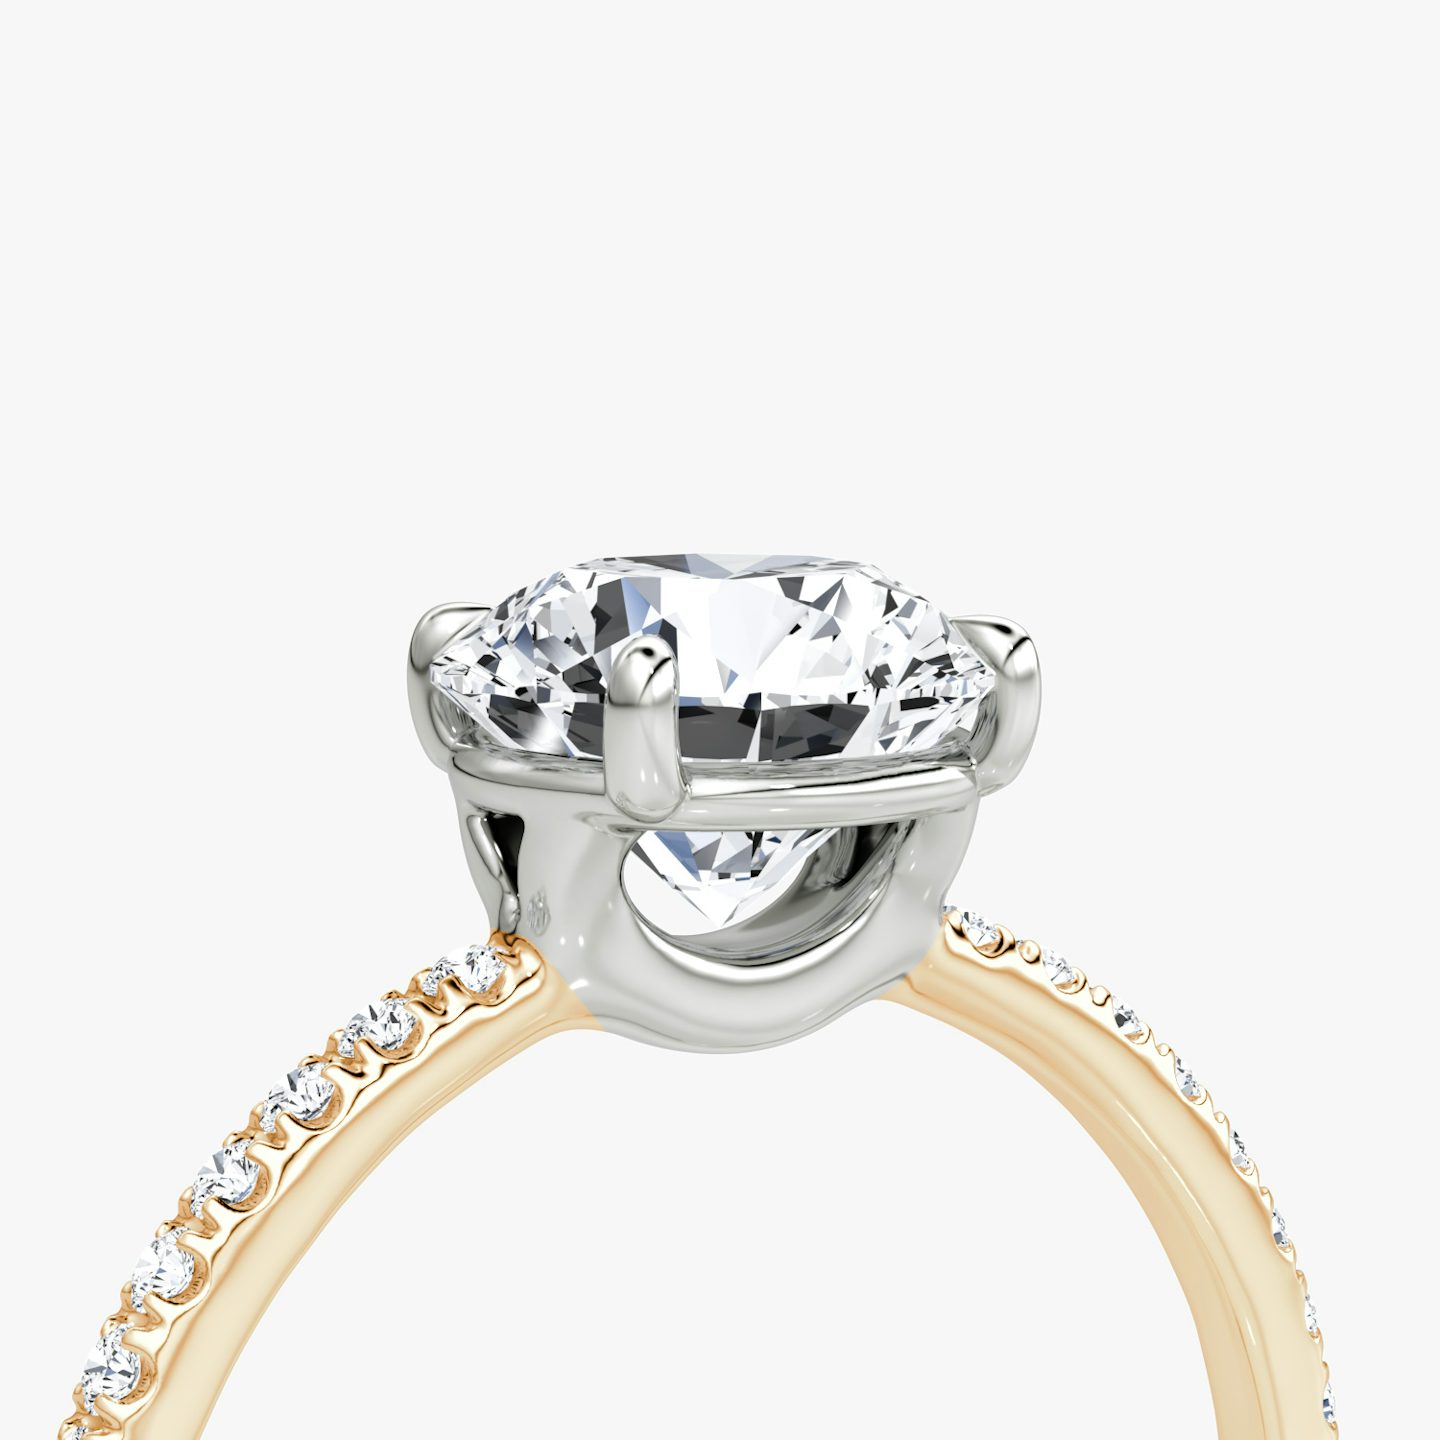 The Signature | Round Brilliant | 14k | 14k Rose Gold and Platinum | Band: Pavé | Band width: Standard | Carat weight: 1 | Setting style: Plain | Diamond orientation: vertical